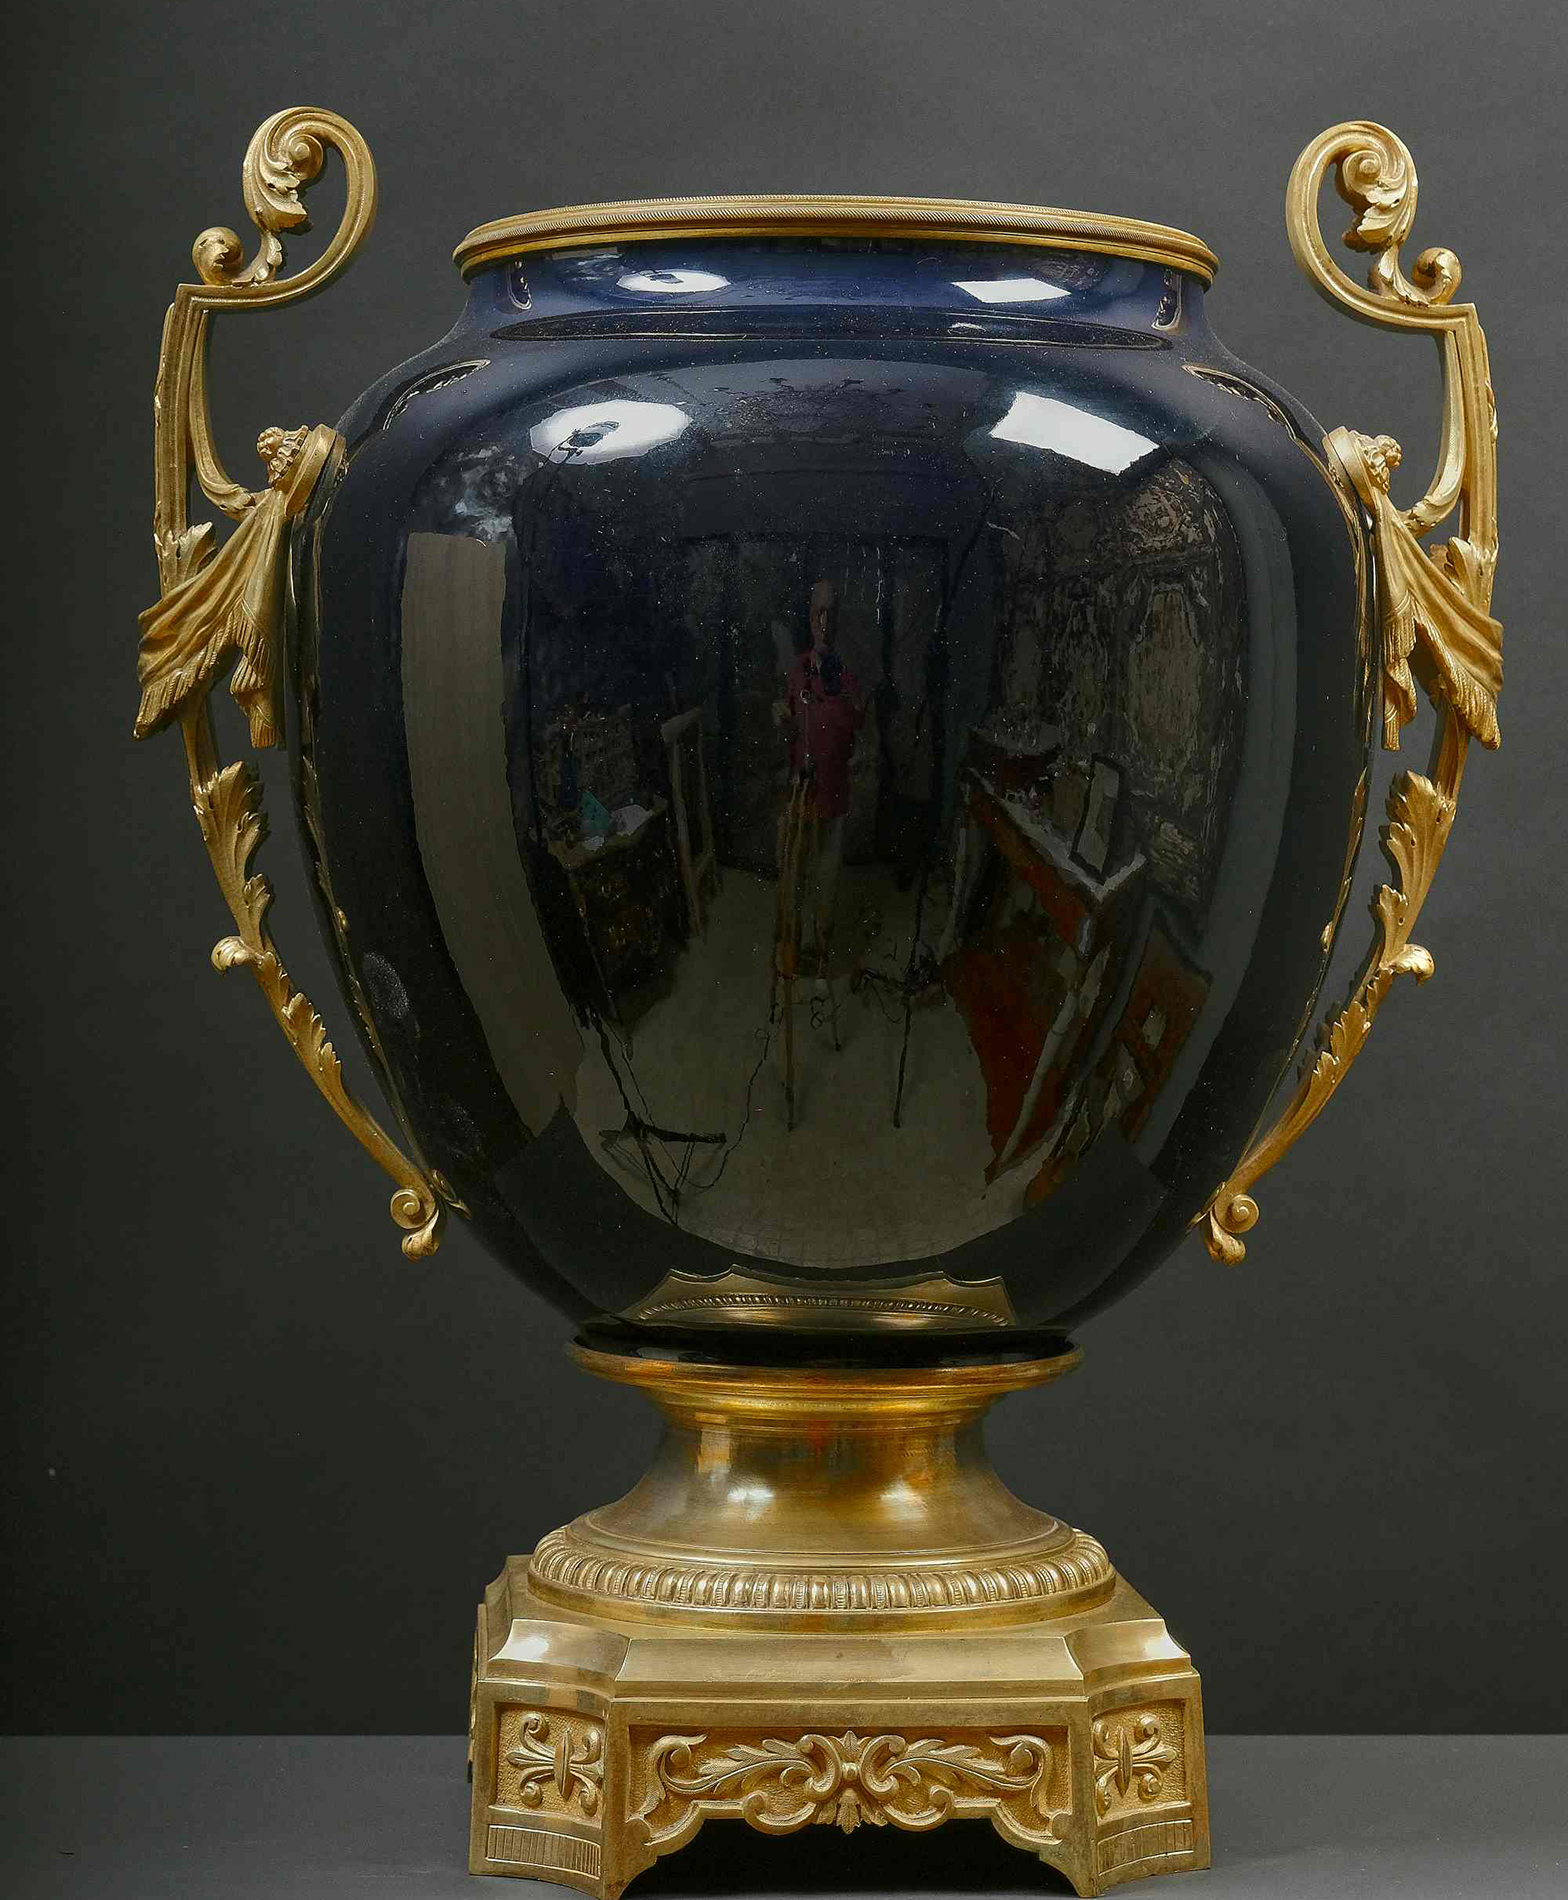 Large and Beautiful Sèvres Vase mounted in gilt bronze, Napoleon III Period, France, 19th century - Image 2 of 5